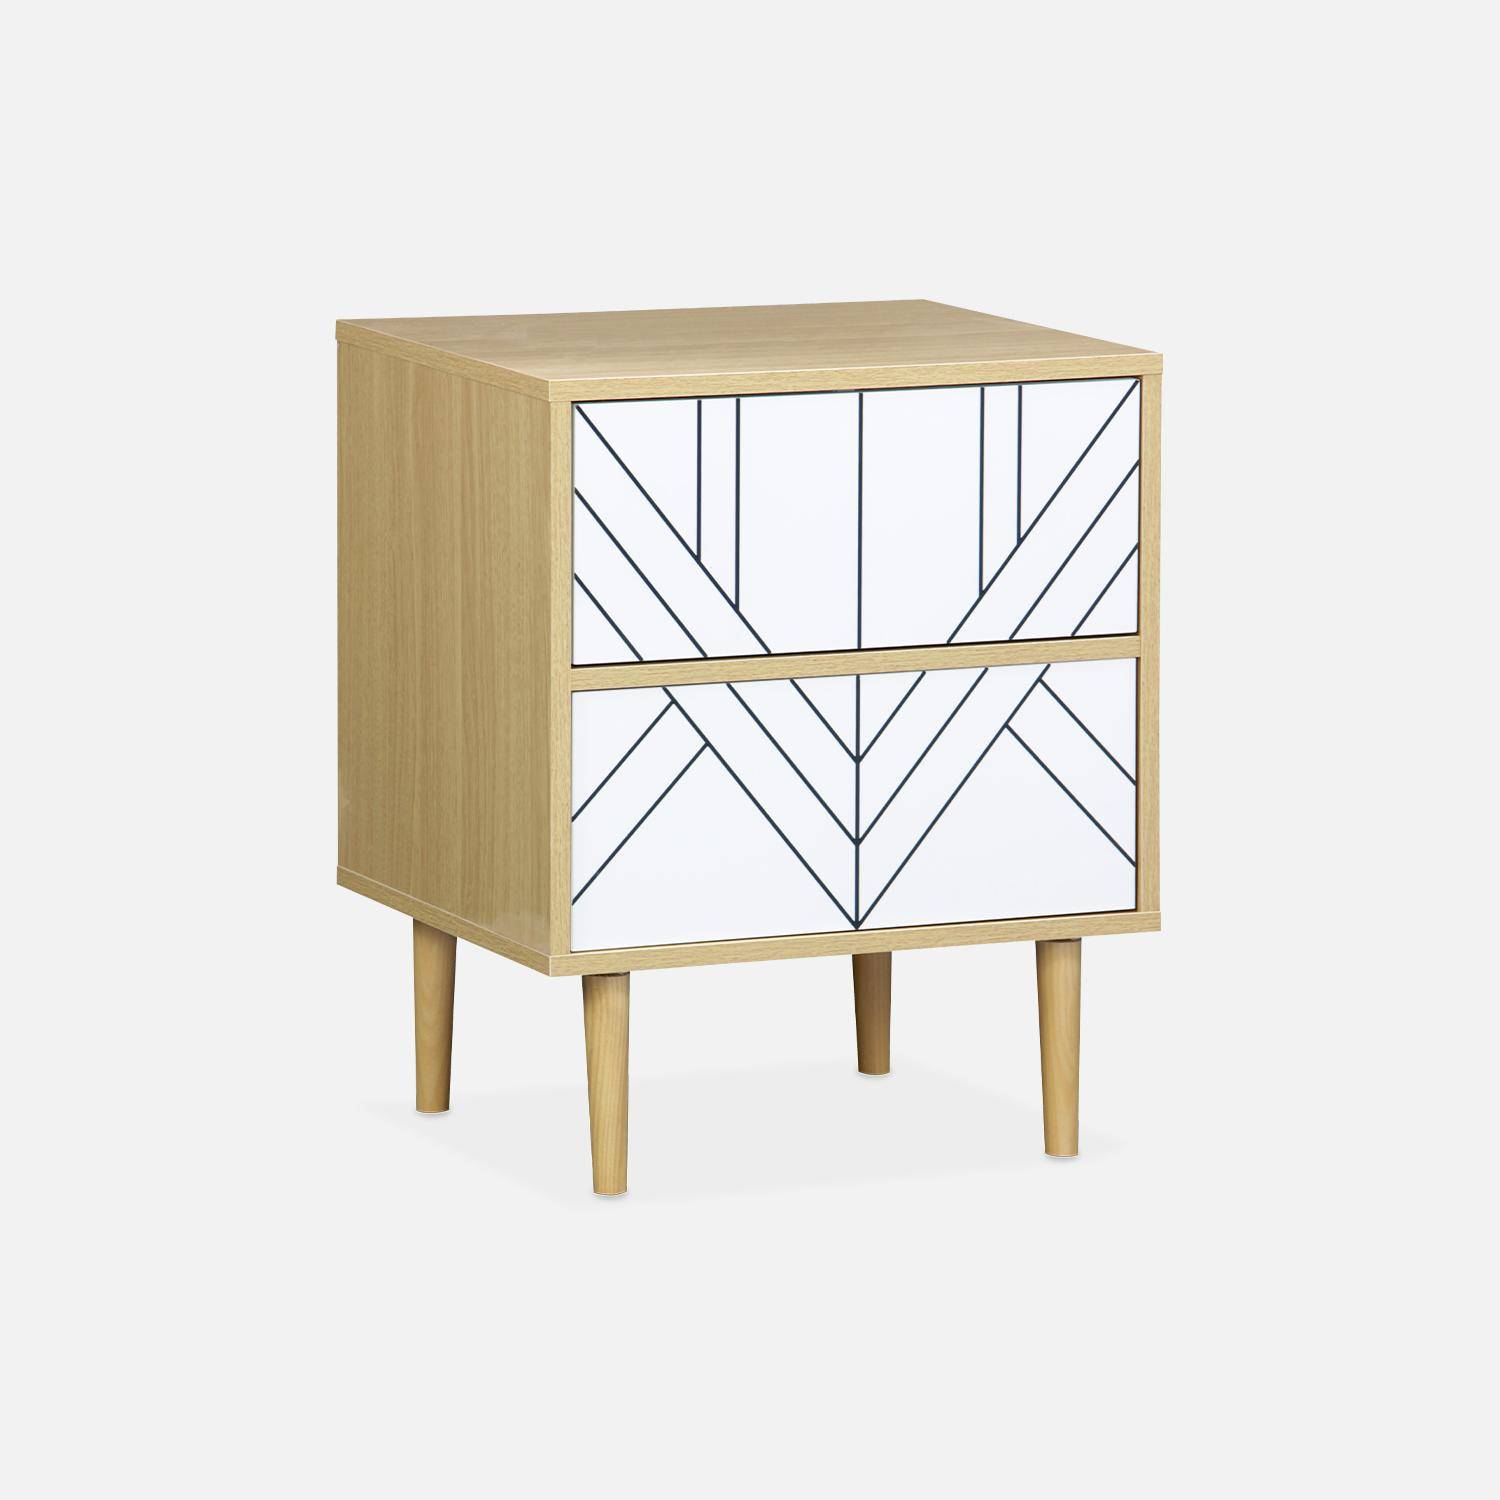 Pair of wood-effect bedside tables with two drawers, 48x40x59cm - Mika - White,sweeek,Photo5